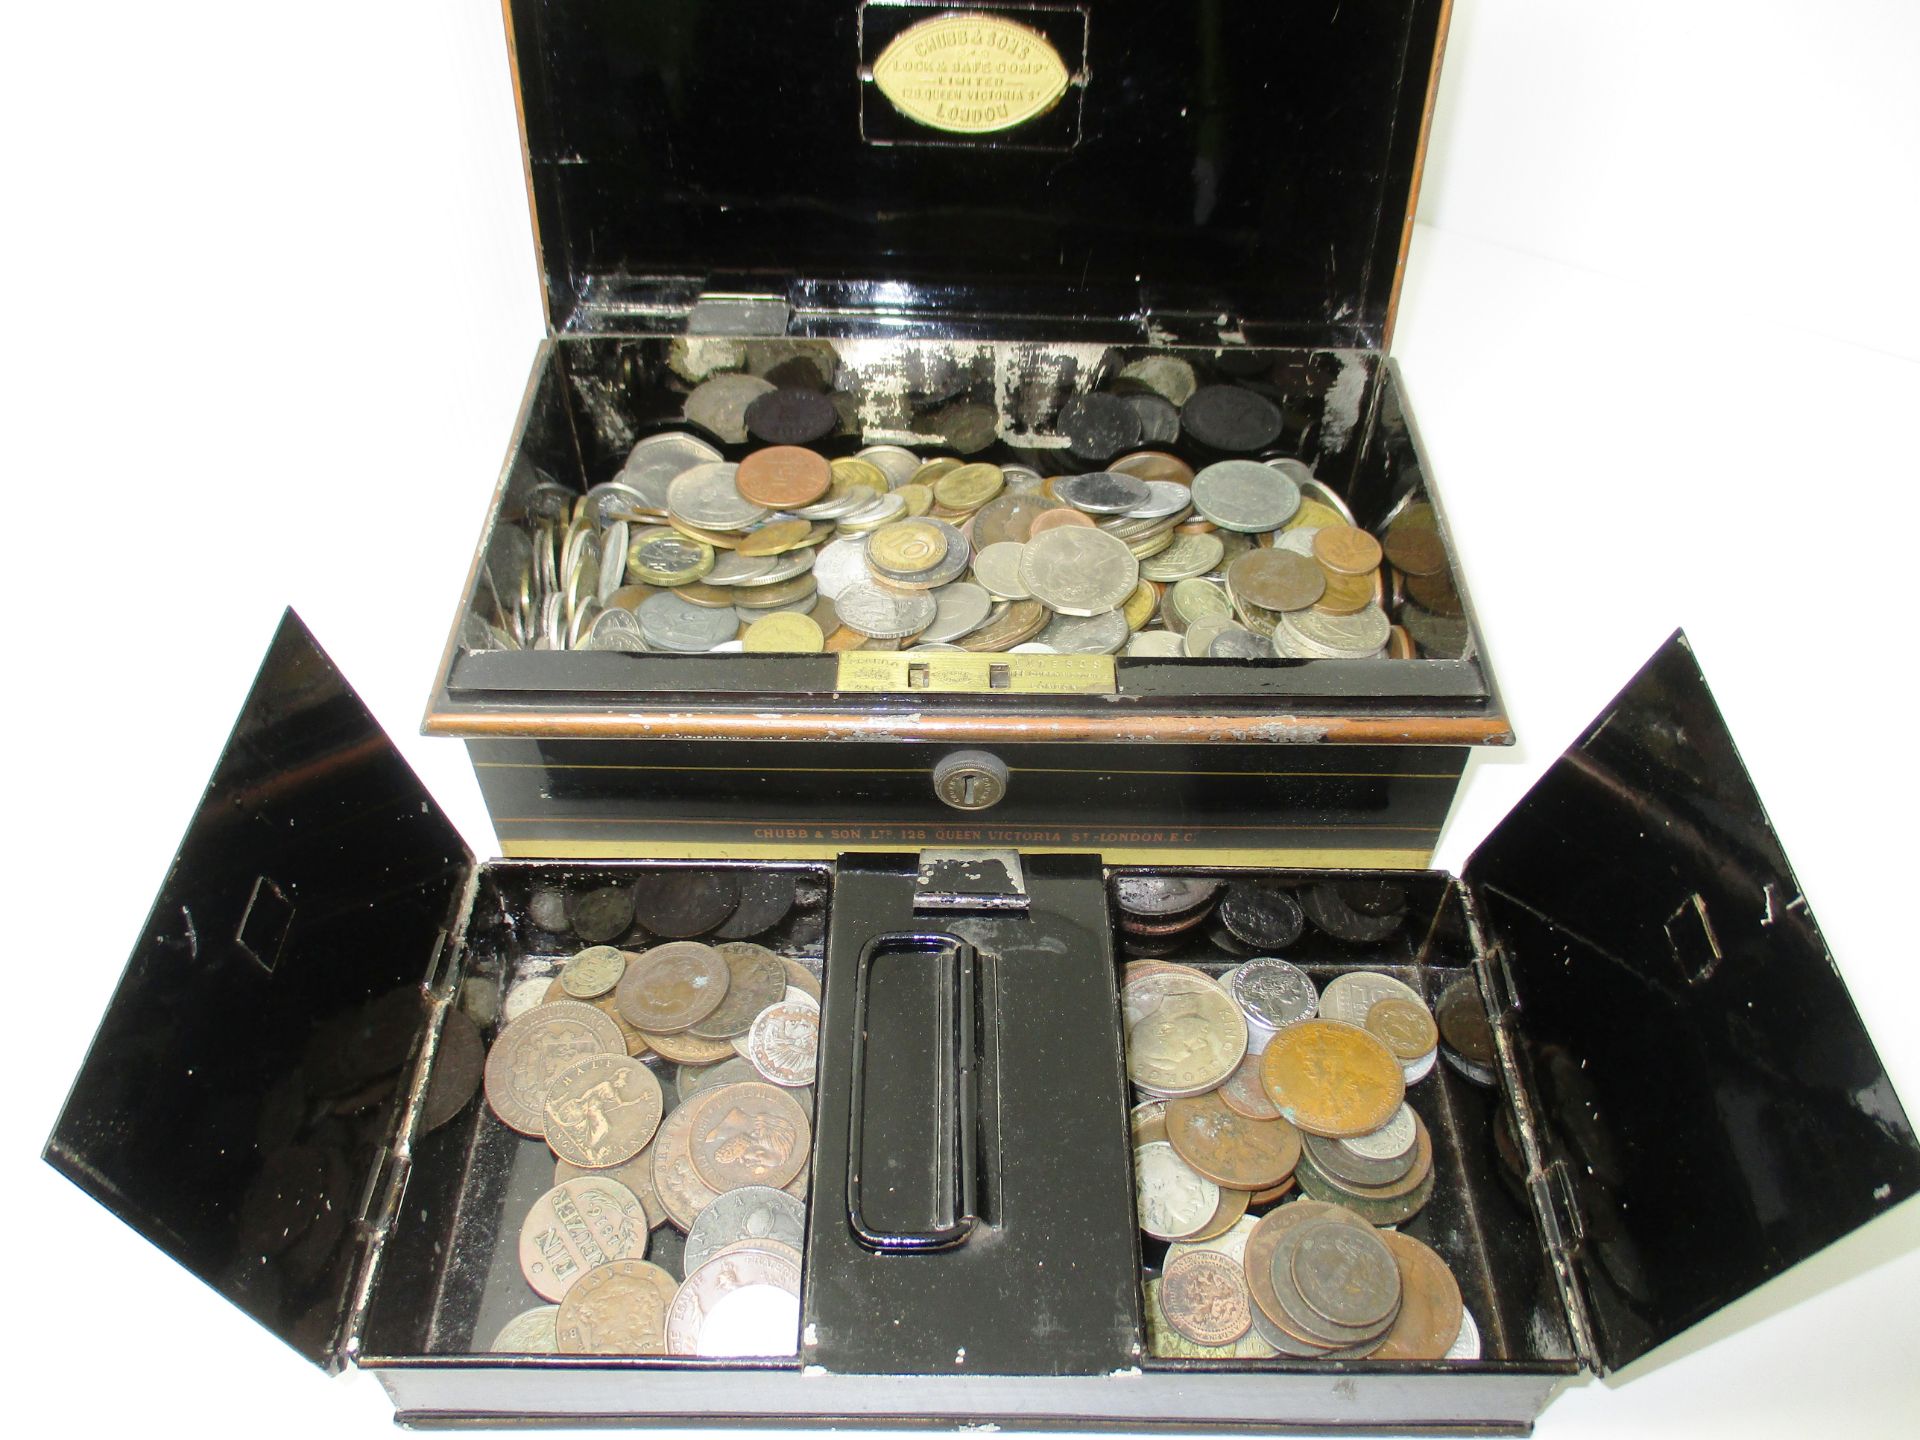 A Chubb & Sons cash box [with key] containing a quantity of assorted world coins